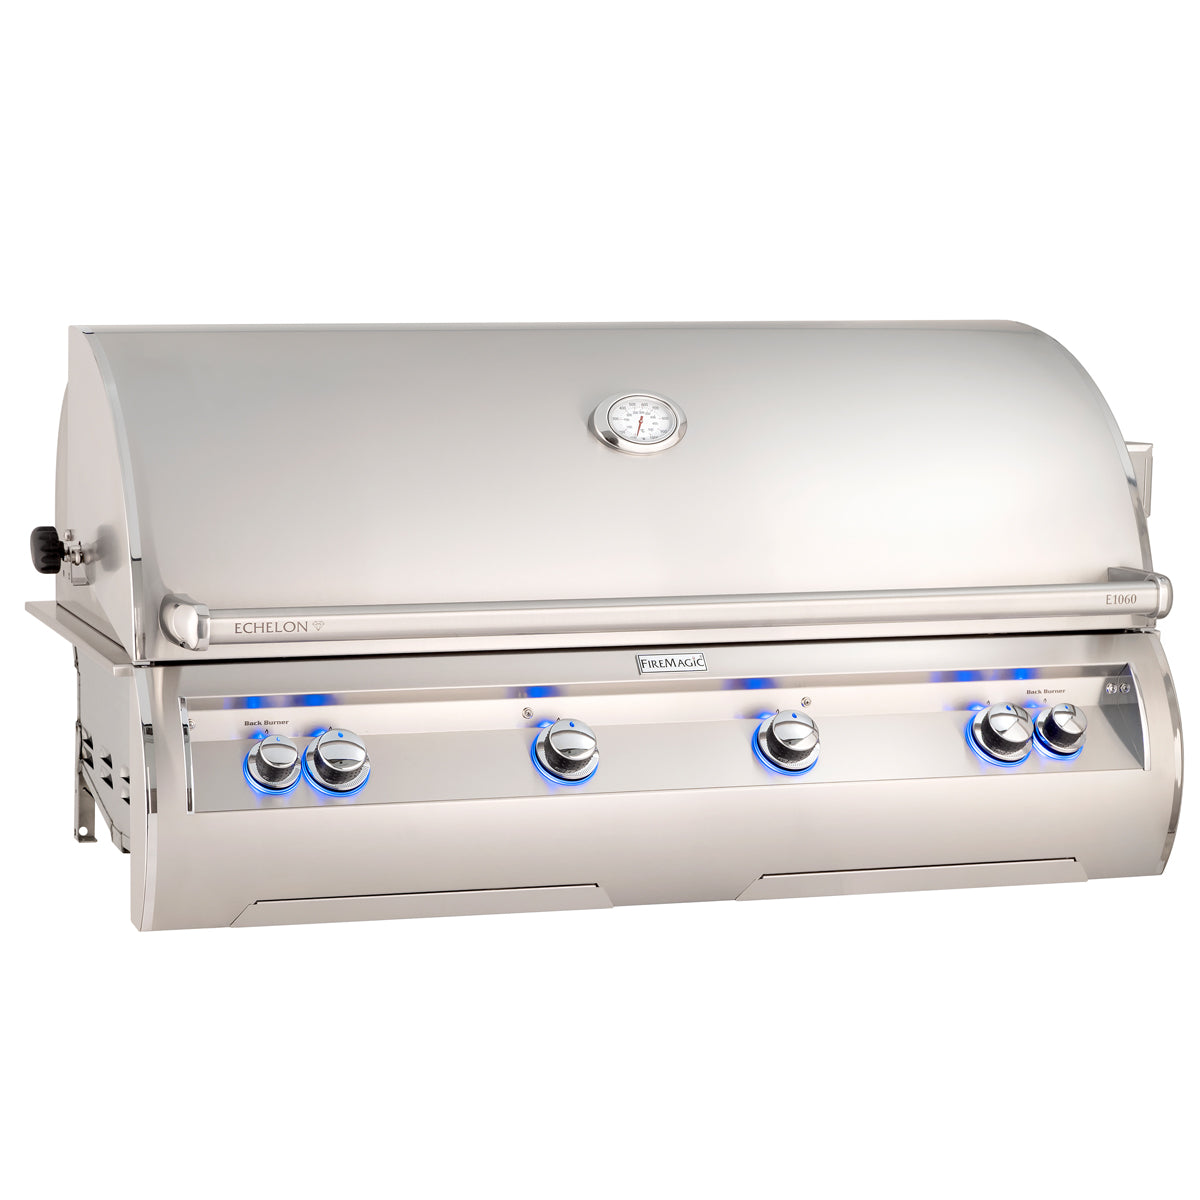 Fire Magic Echelon E1060i Built In Grill – Analog Thermometer